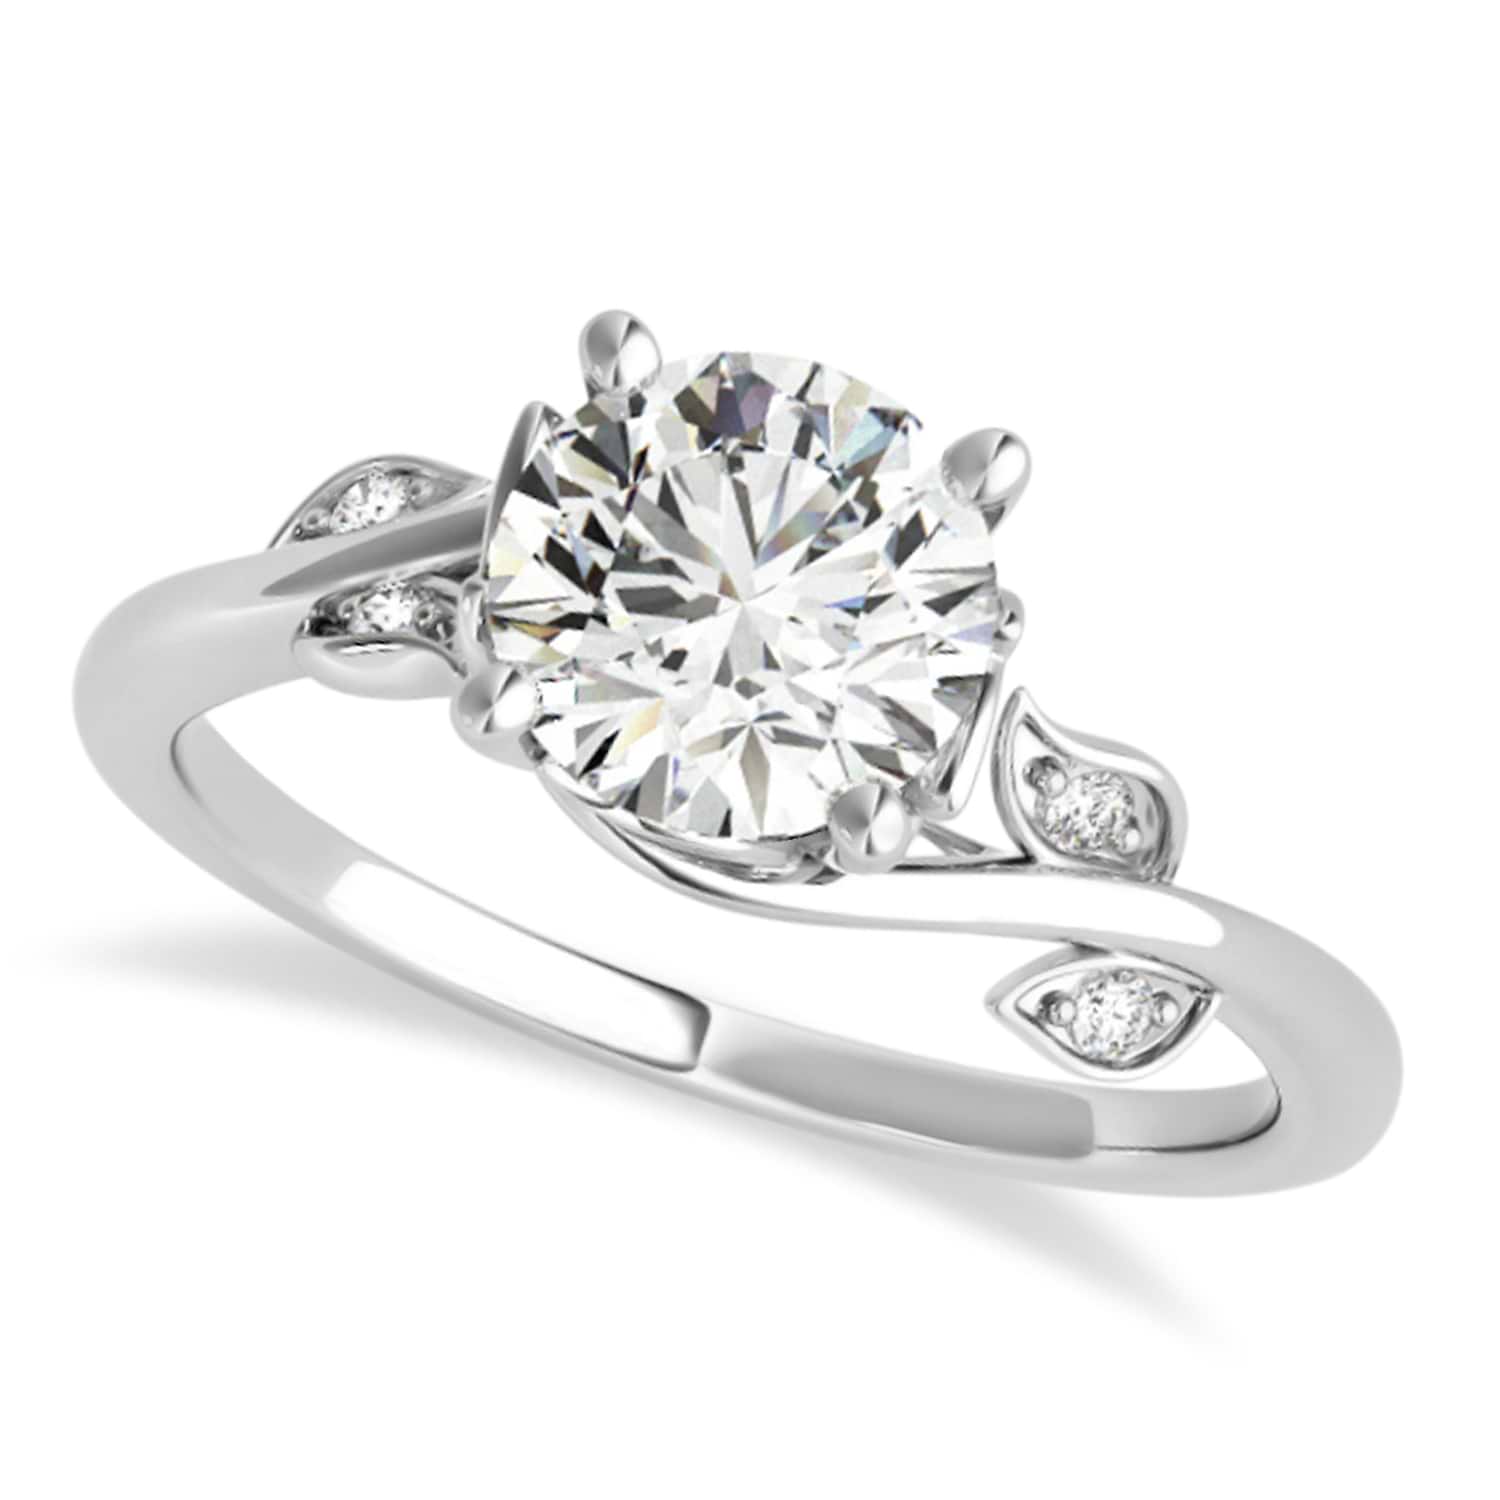 Byapss Floral Diamond Floral Engagement Ring 14k White Gold (1.00ct)